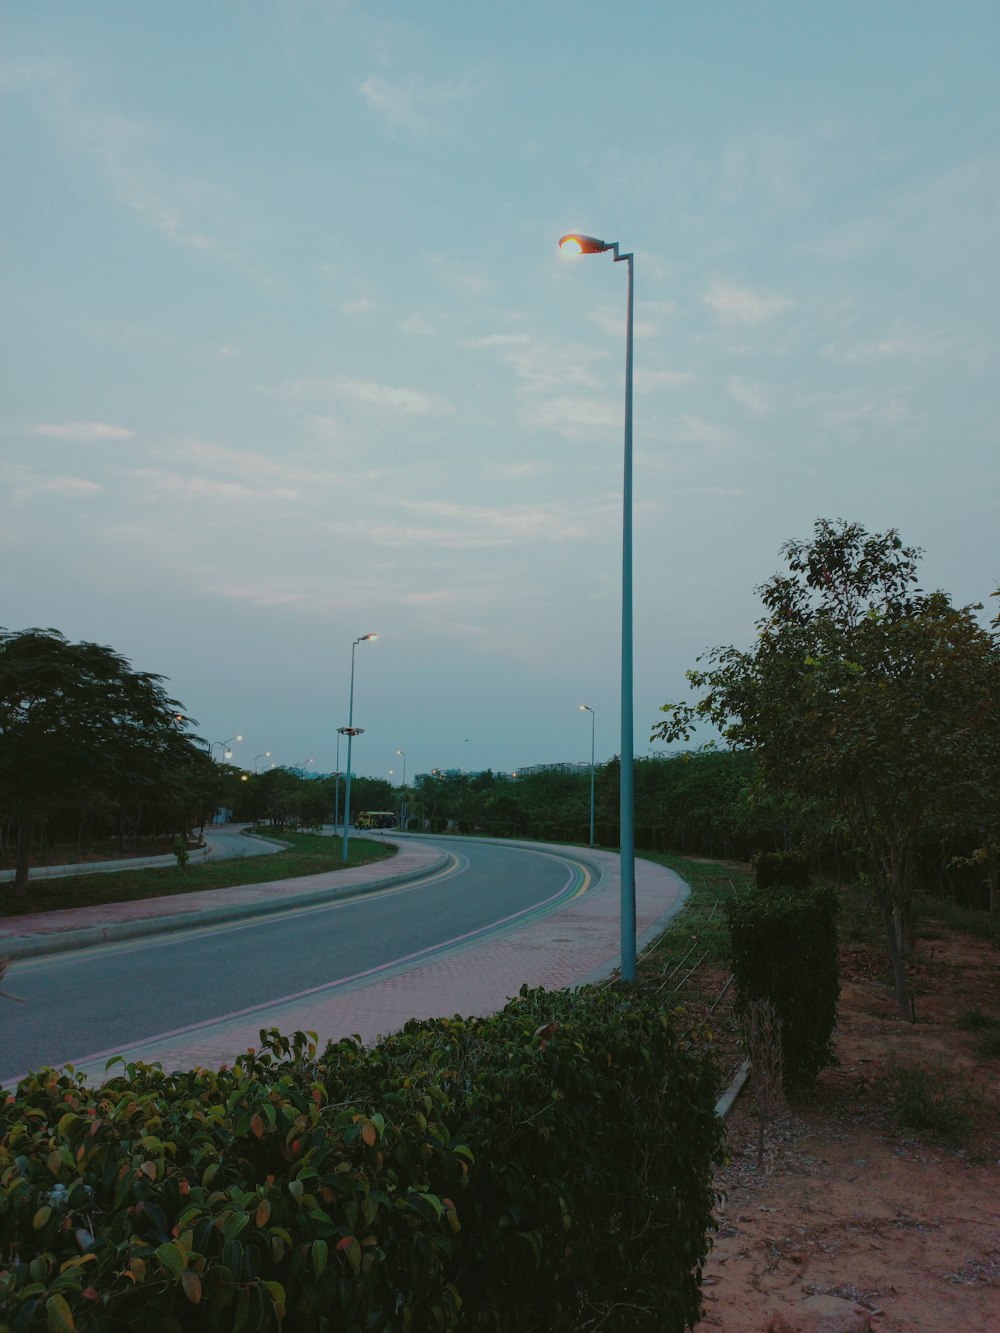 a street light on the side of a road